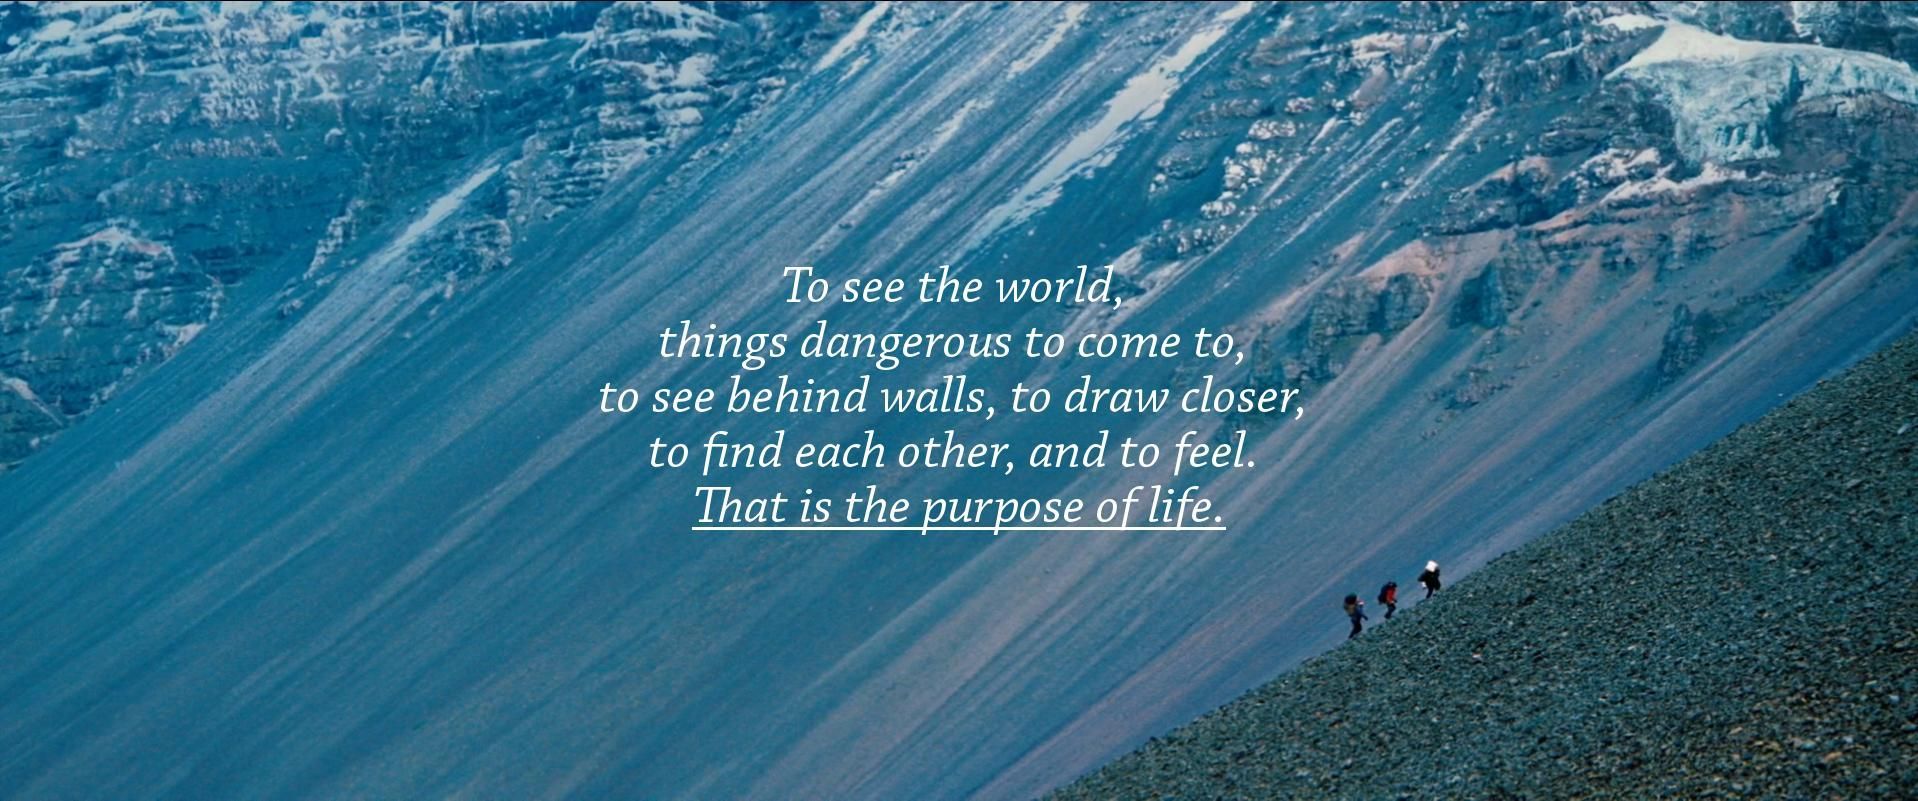 Daily HD wallpaper: The Secret Life of Walter Mitty screen grab +